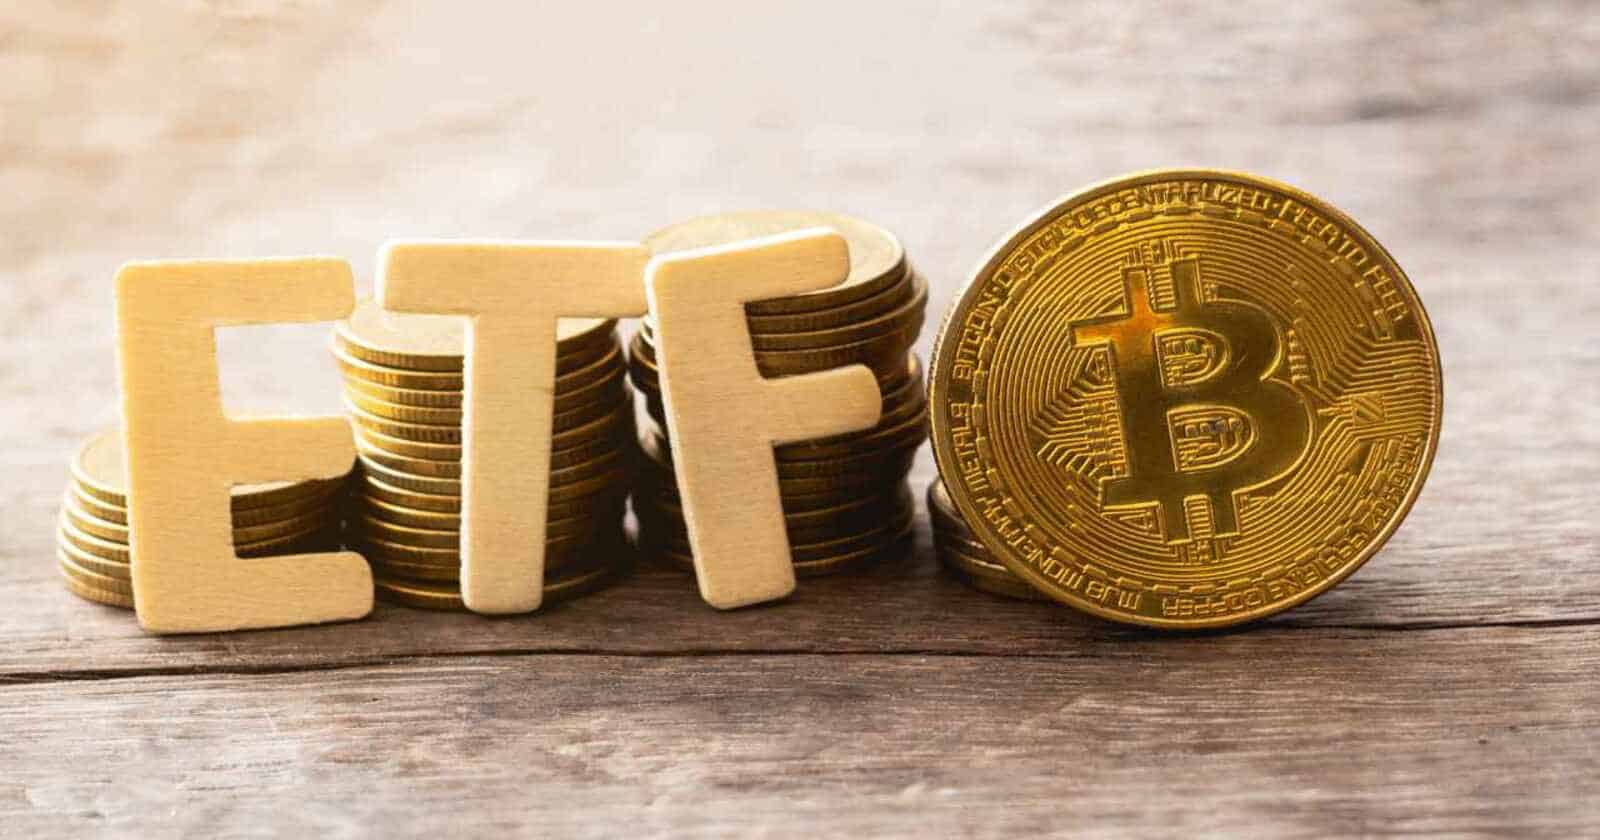 Bitcoin ETFs See Continued Positive Inflow, Amass 500K BTC Valued At $35B